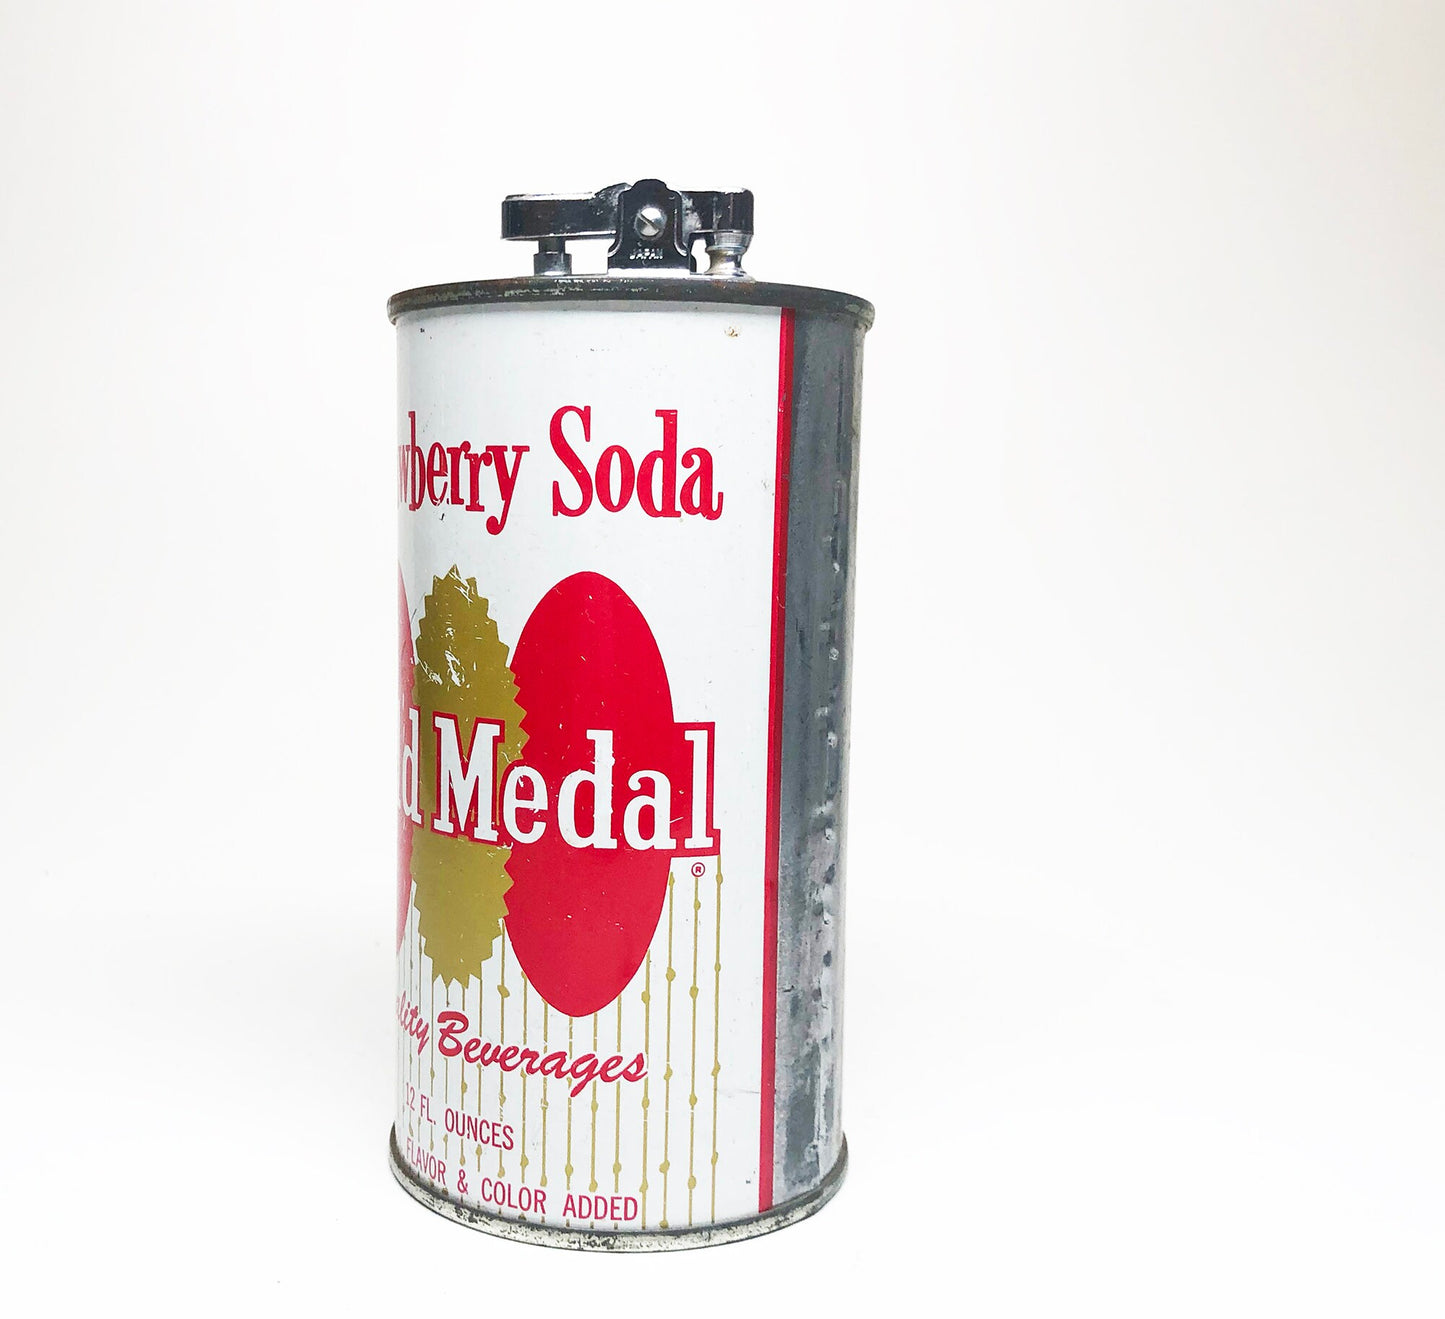 Gold Medal Strawberry 1950s Soda Can Lighter